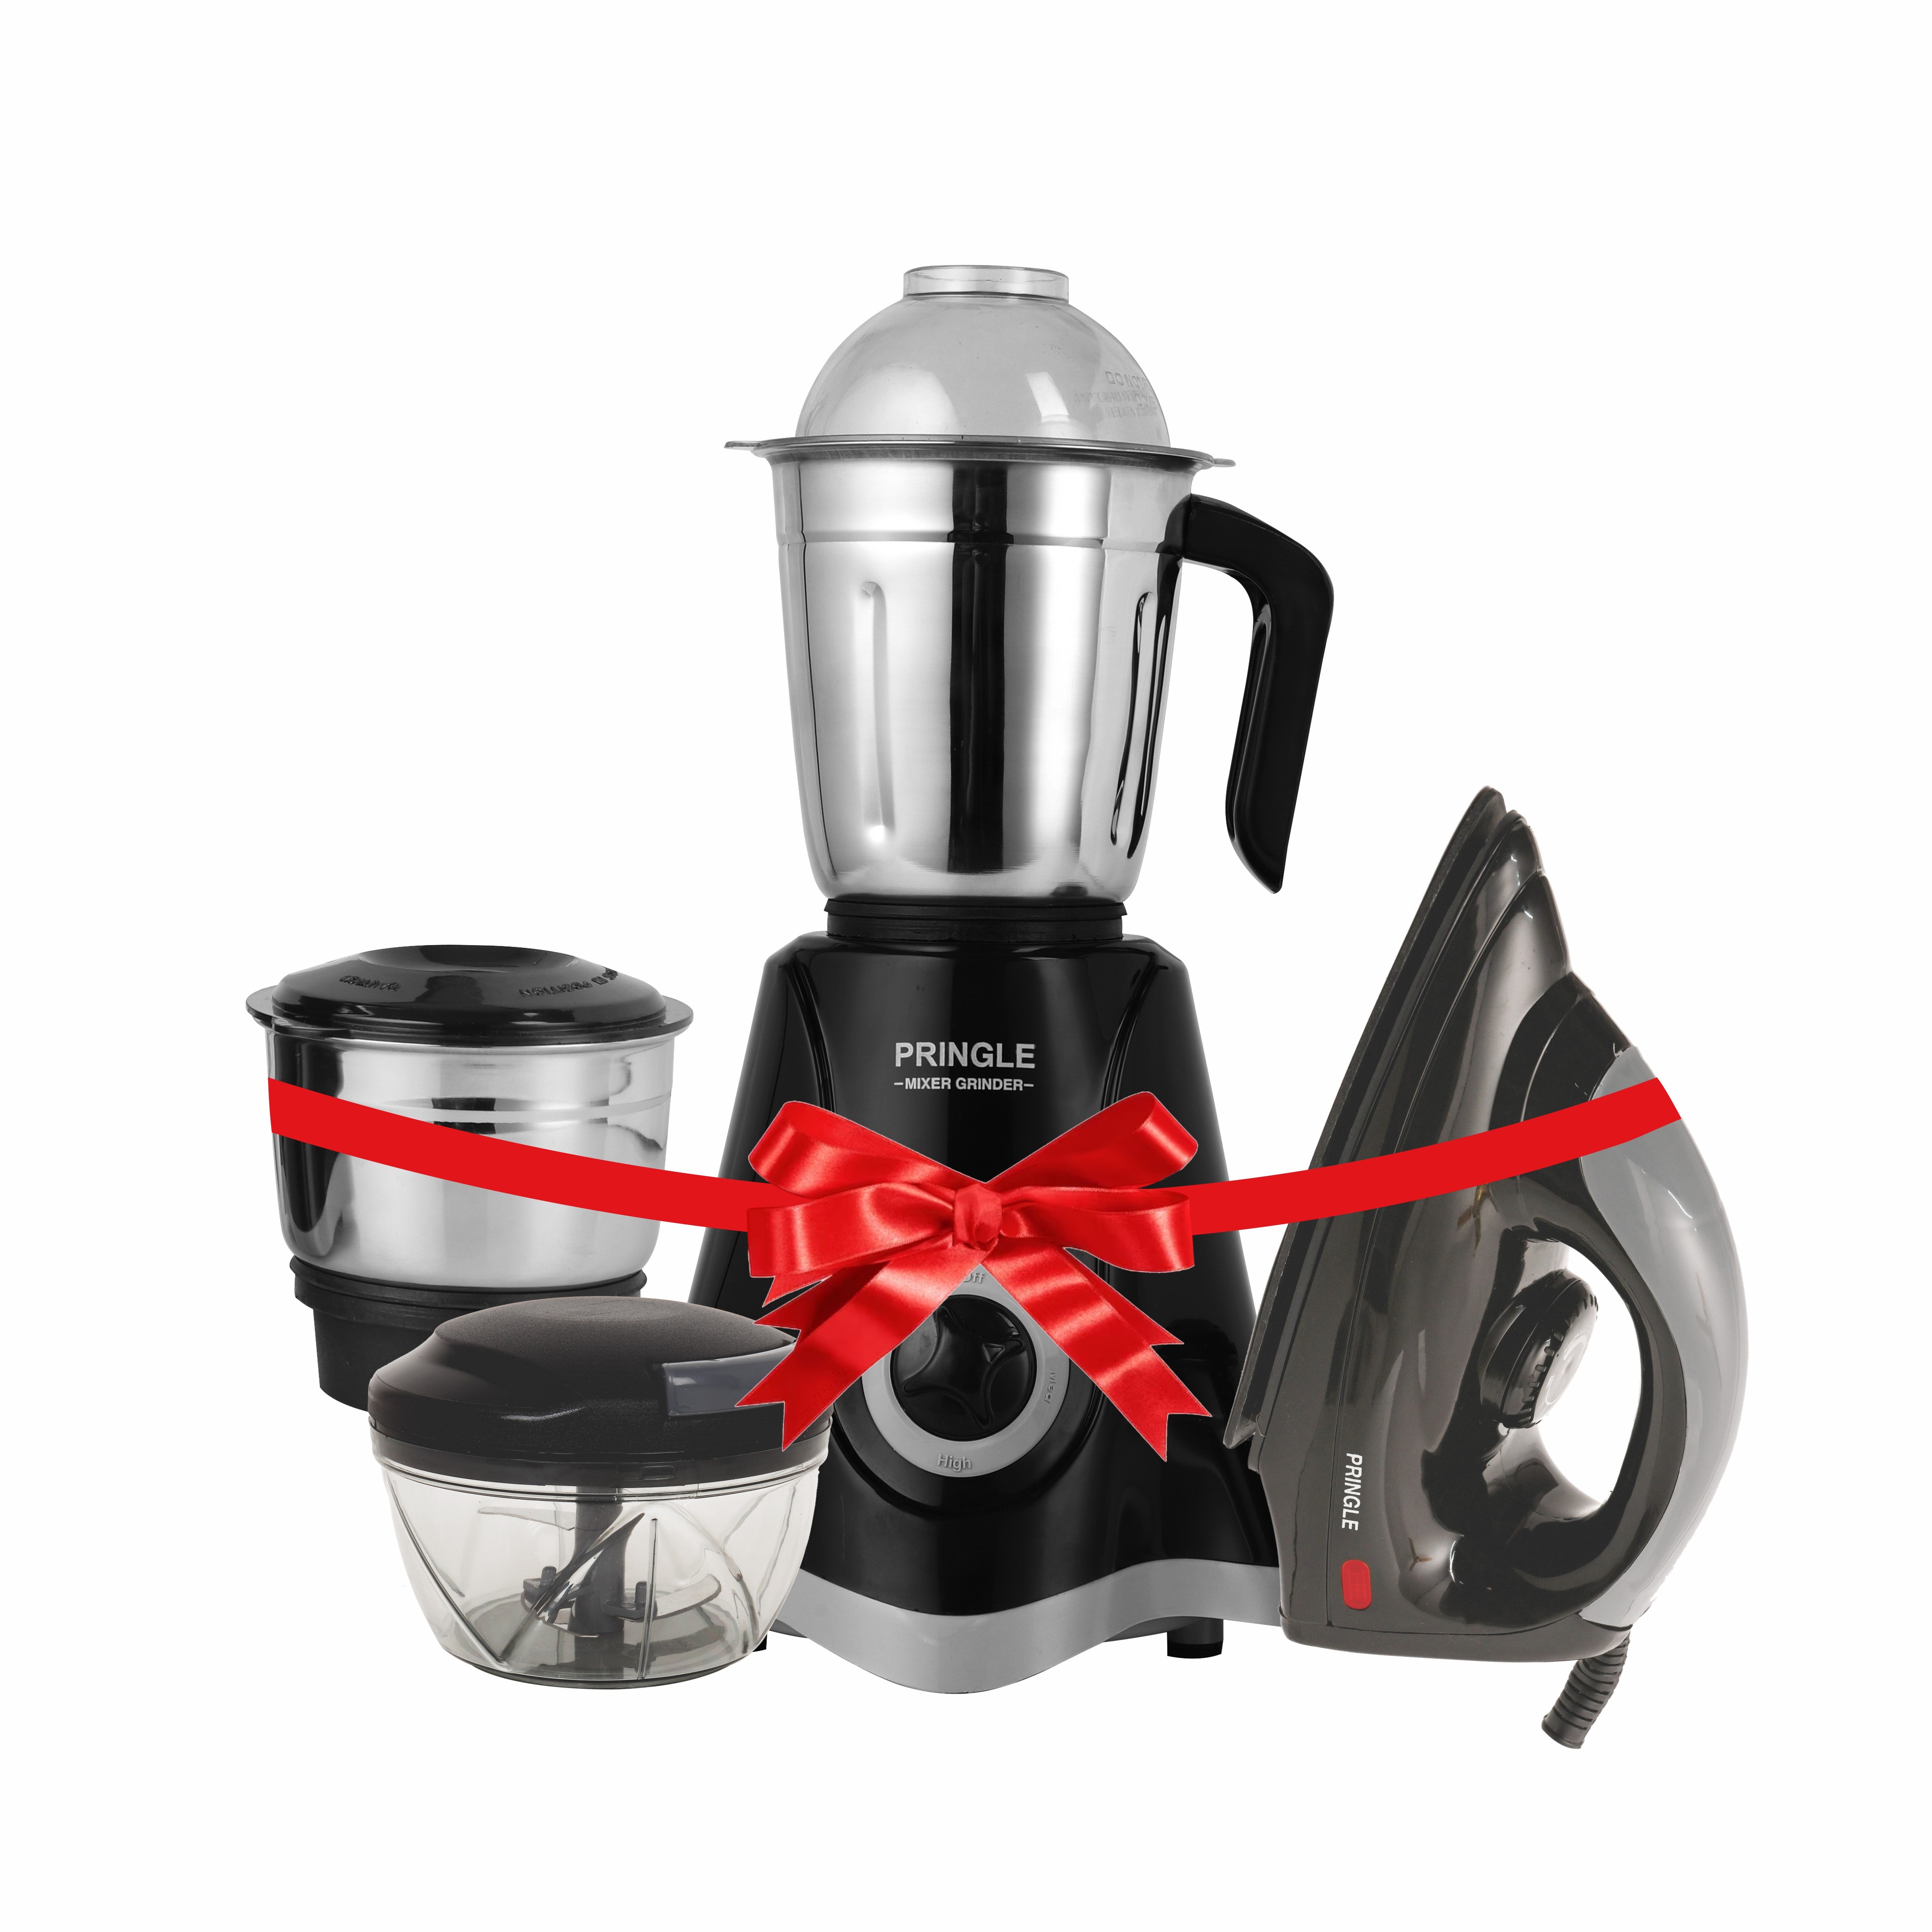 Pringle Kitchen King Combo 500W 2 Jar Mixer Grinder with 3 Speed Control and 1000W Dry Non-Stick soleplate Iron and Pulling vegetable Chopper Super Combo (Black - 1 year Warranty) - Pringle Appliances